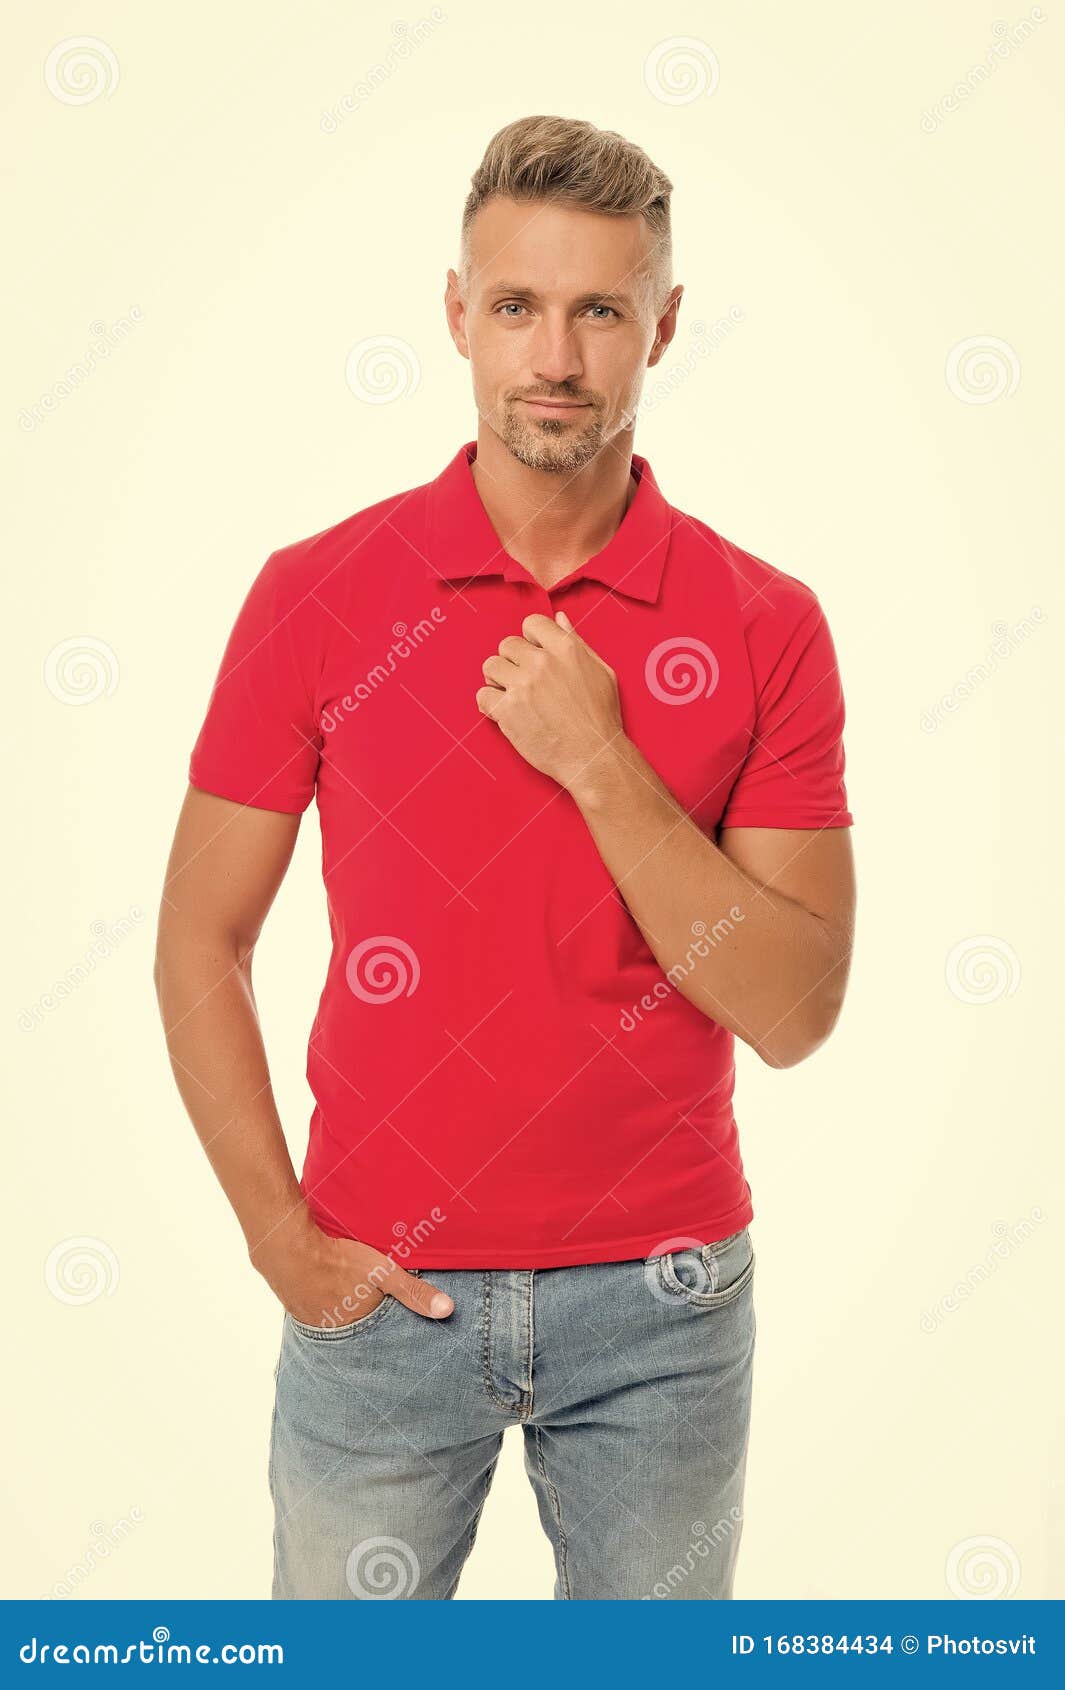 Perfect Fit. daily Outfit. Man Handsome in Red Shirt. Guy with Bristle Wear  Casual Outfit. Model Clothes Shop Stock Photo - Image of confidently,  masculinity: 168384434